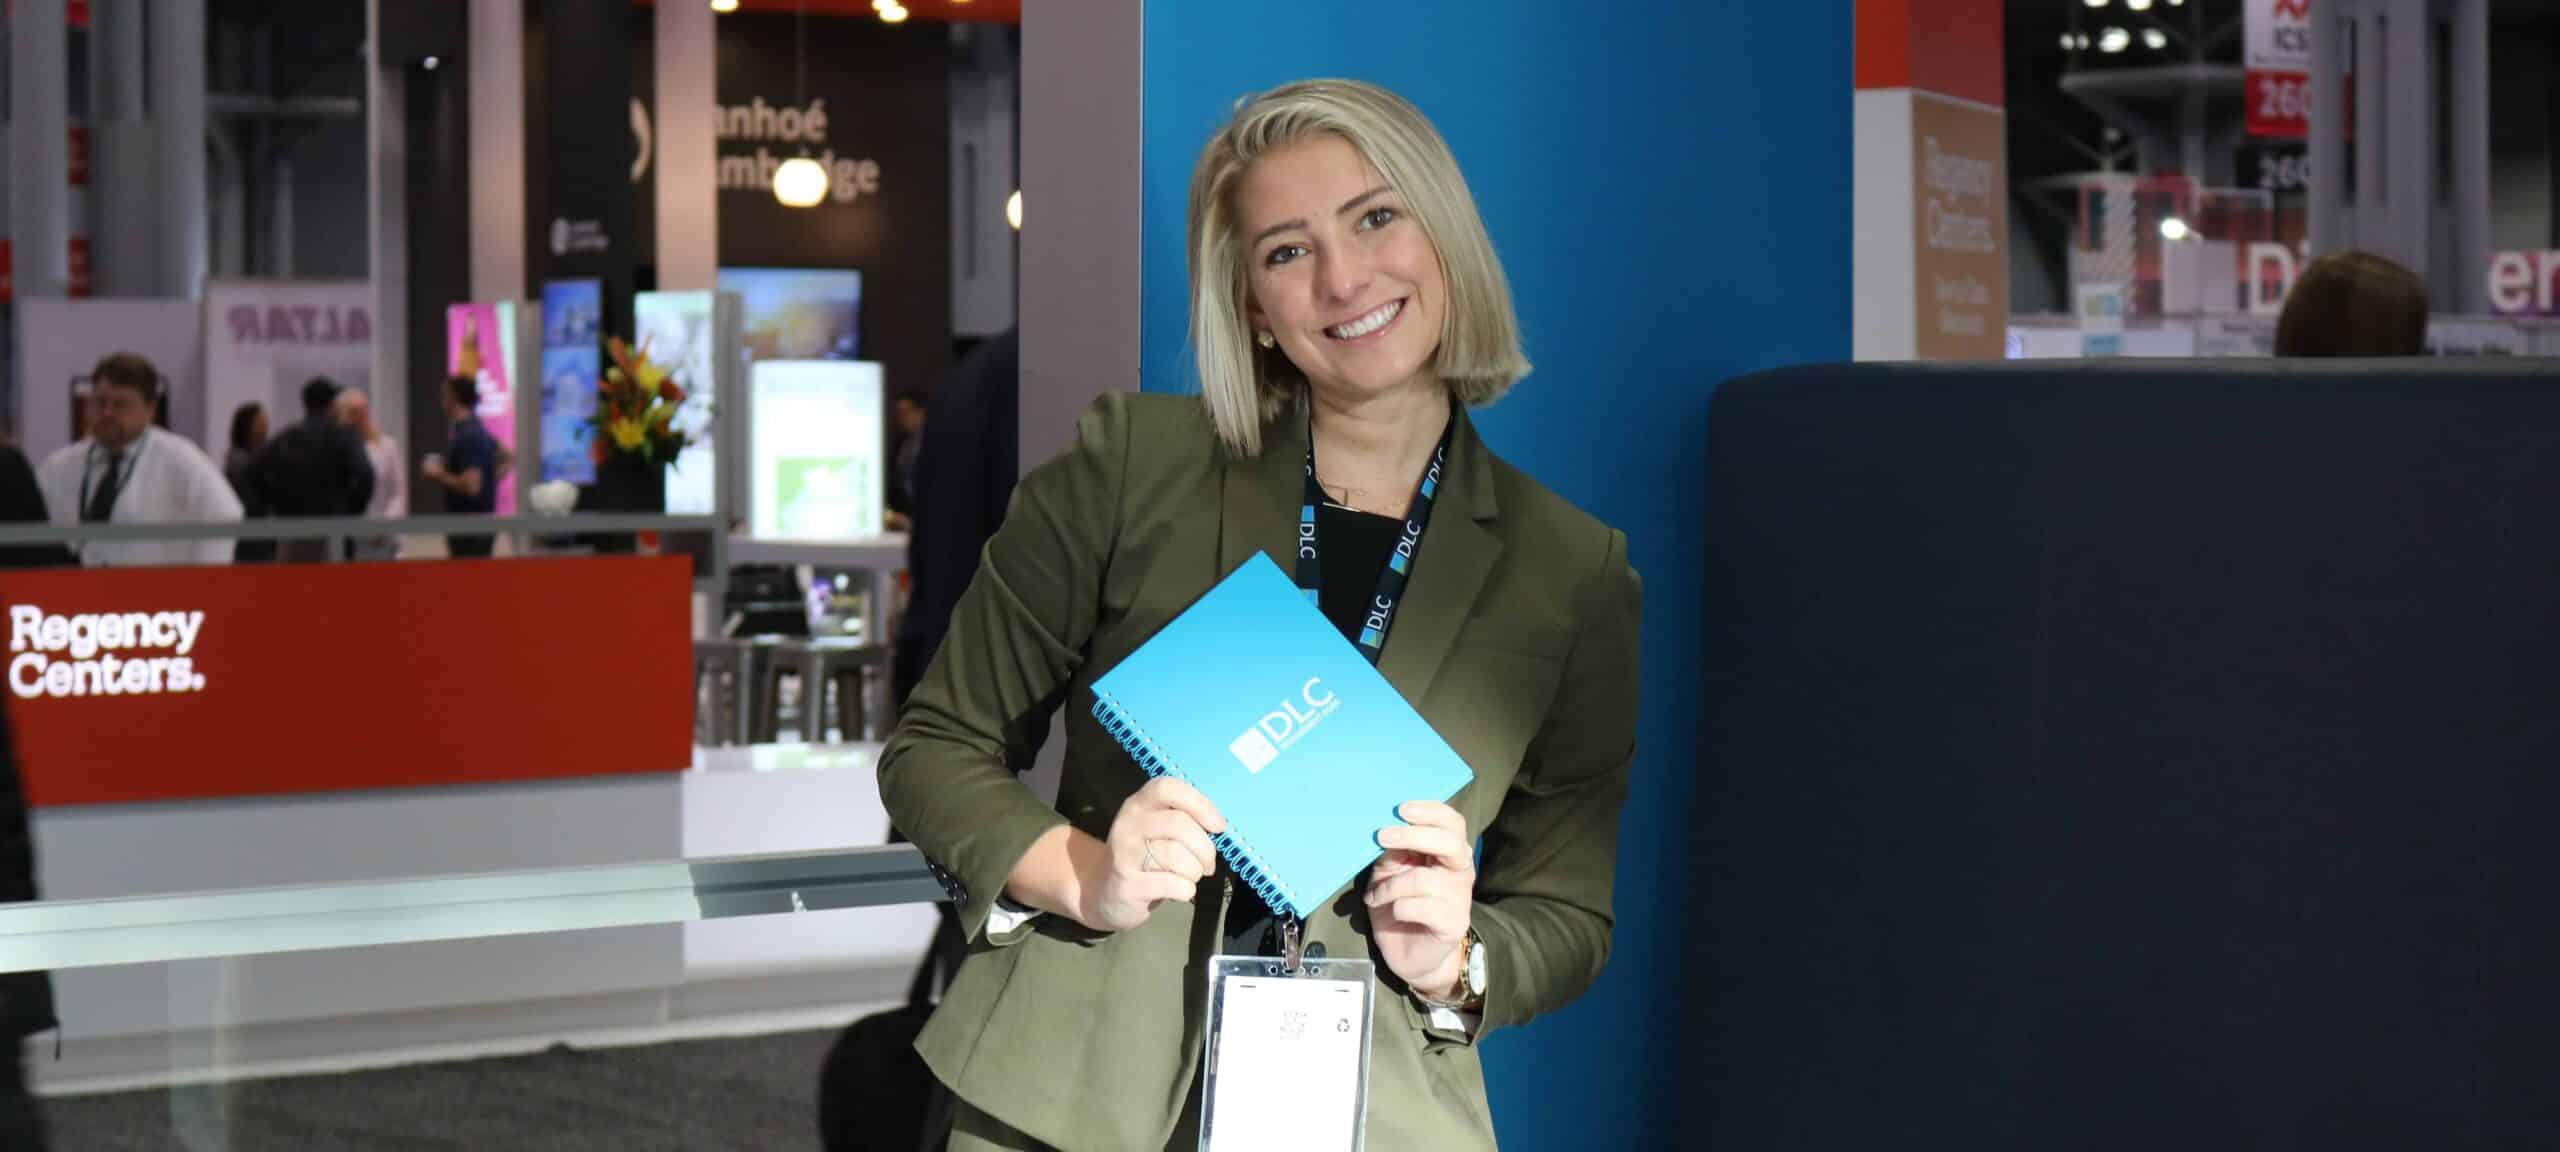 A woman smiling while holding up a DLC notebook